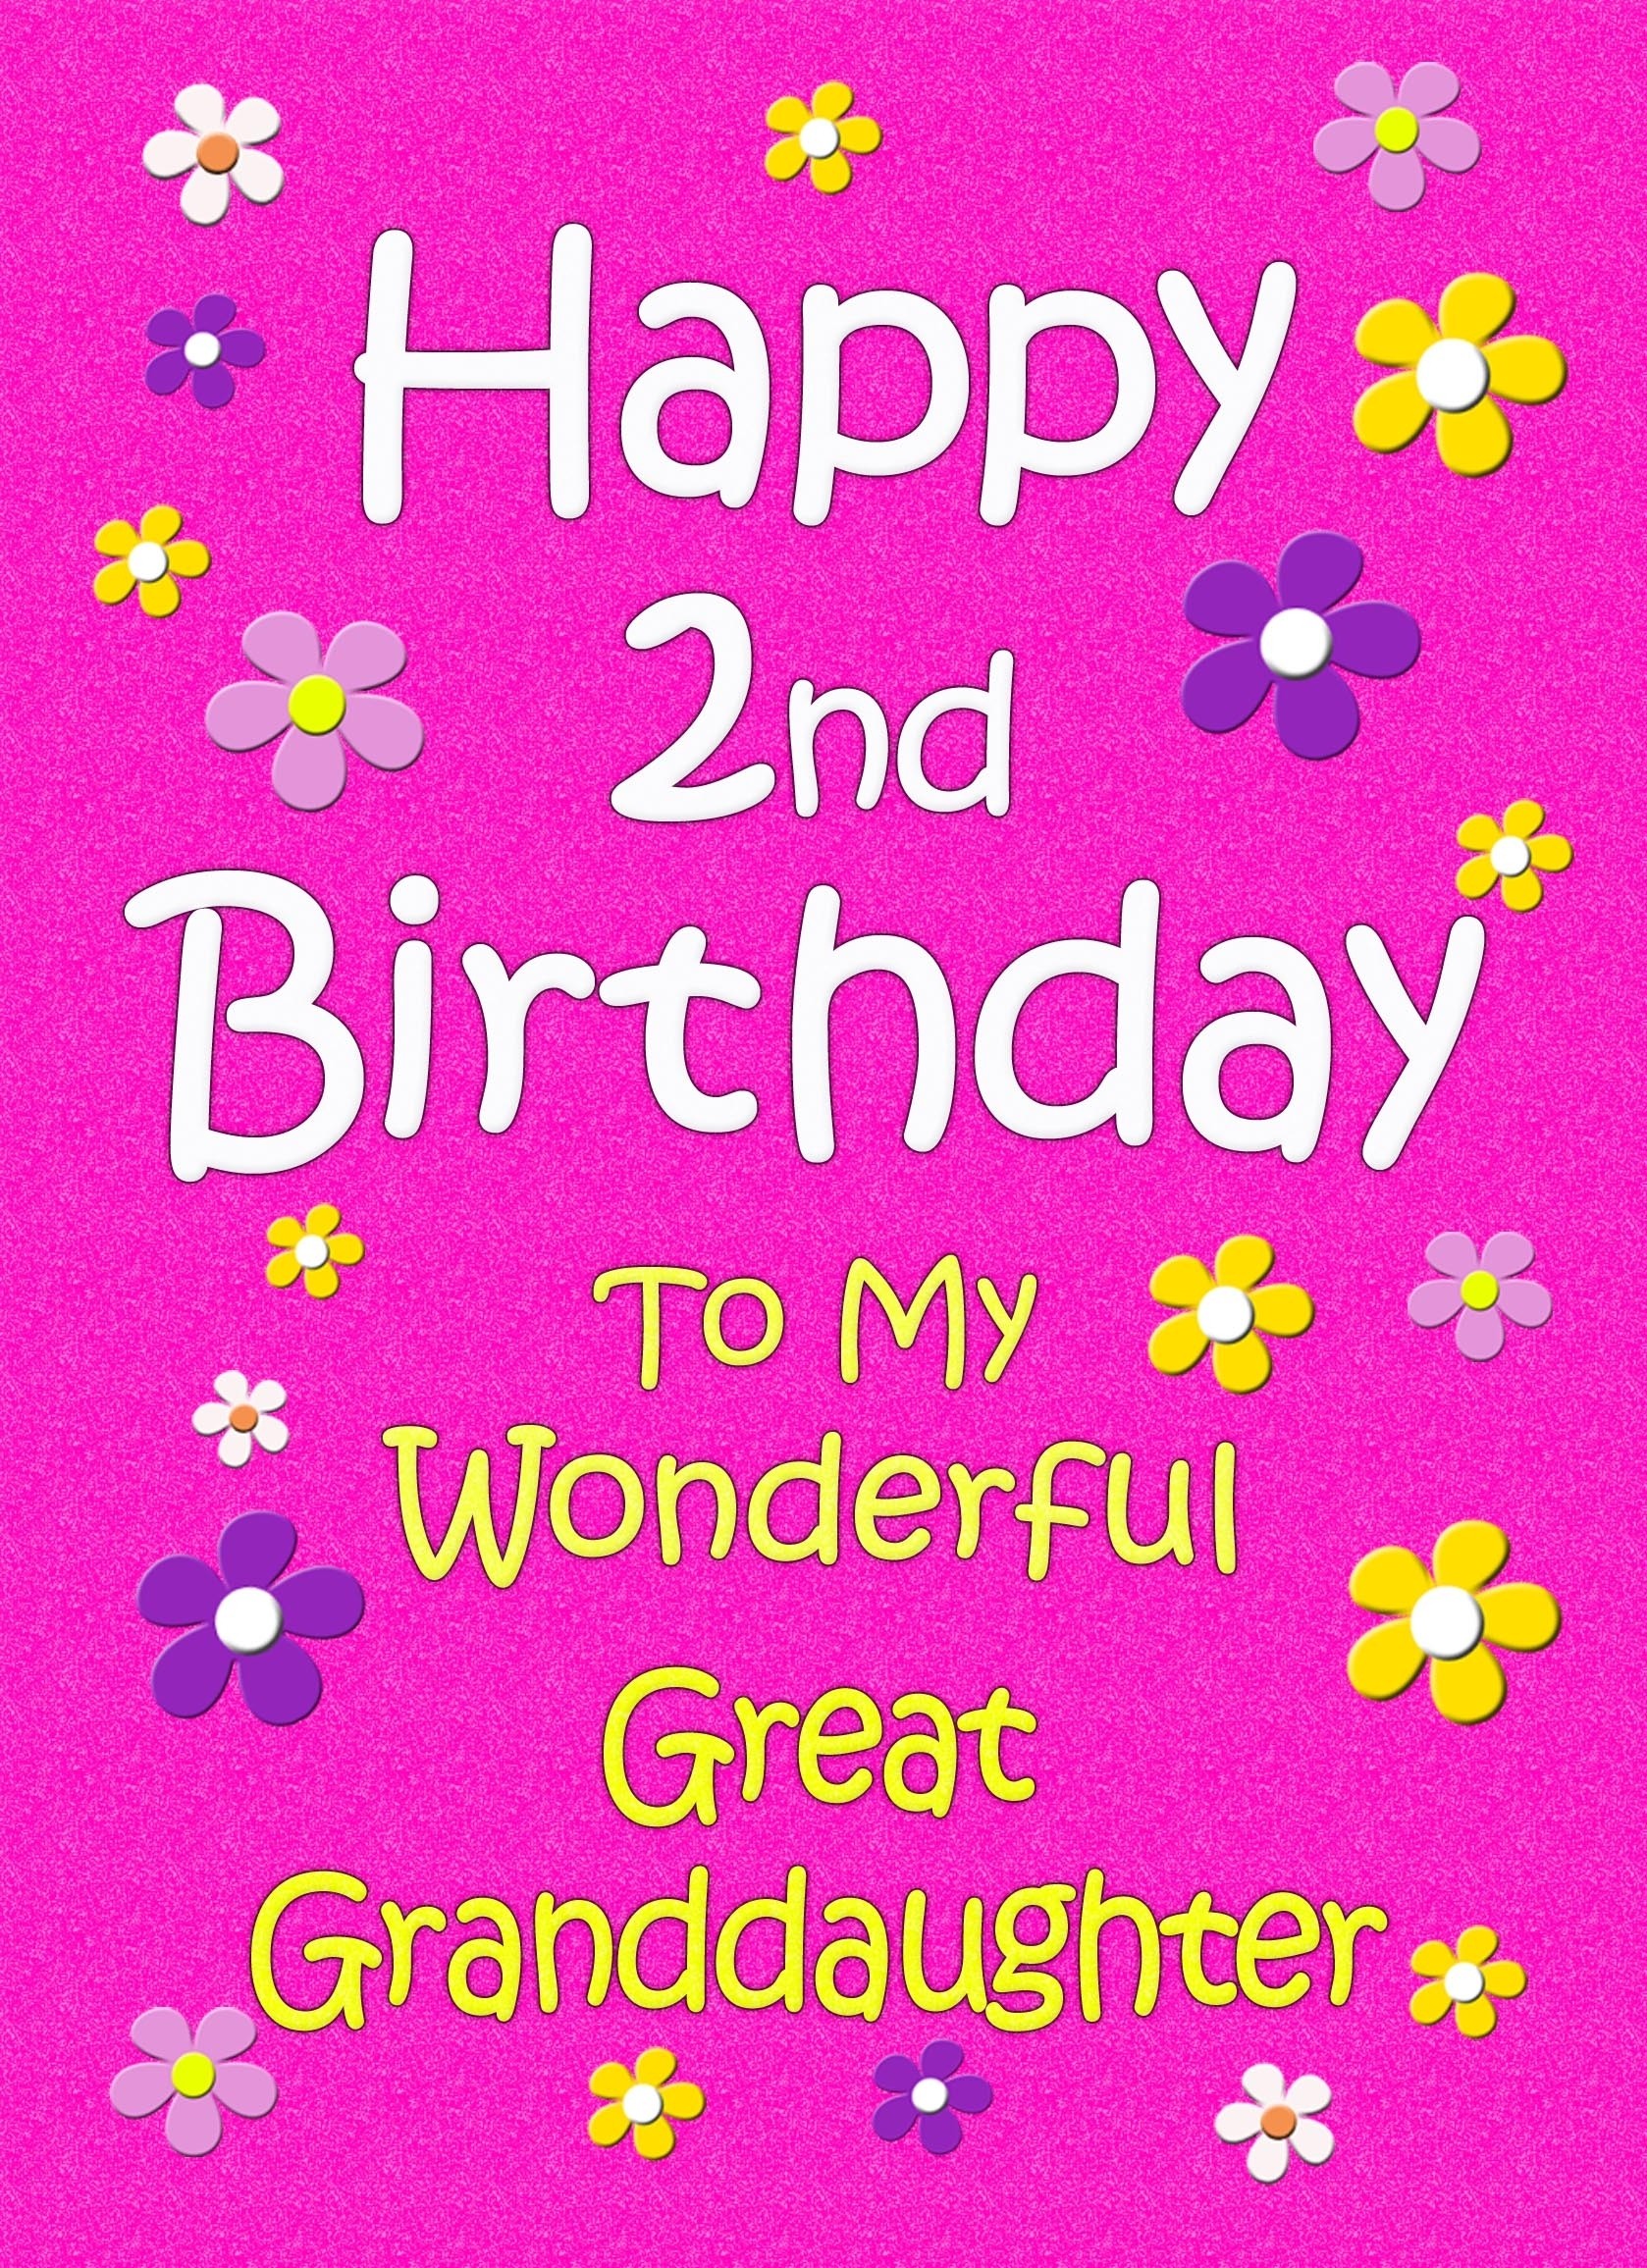 Great Granddaughter 2nd Birthday Card (Pink)